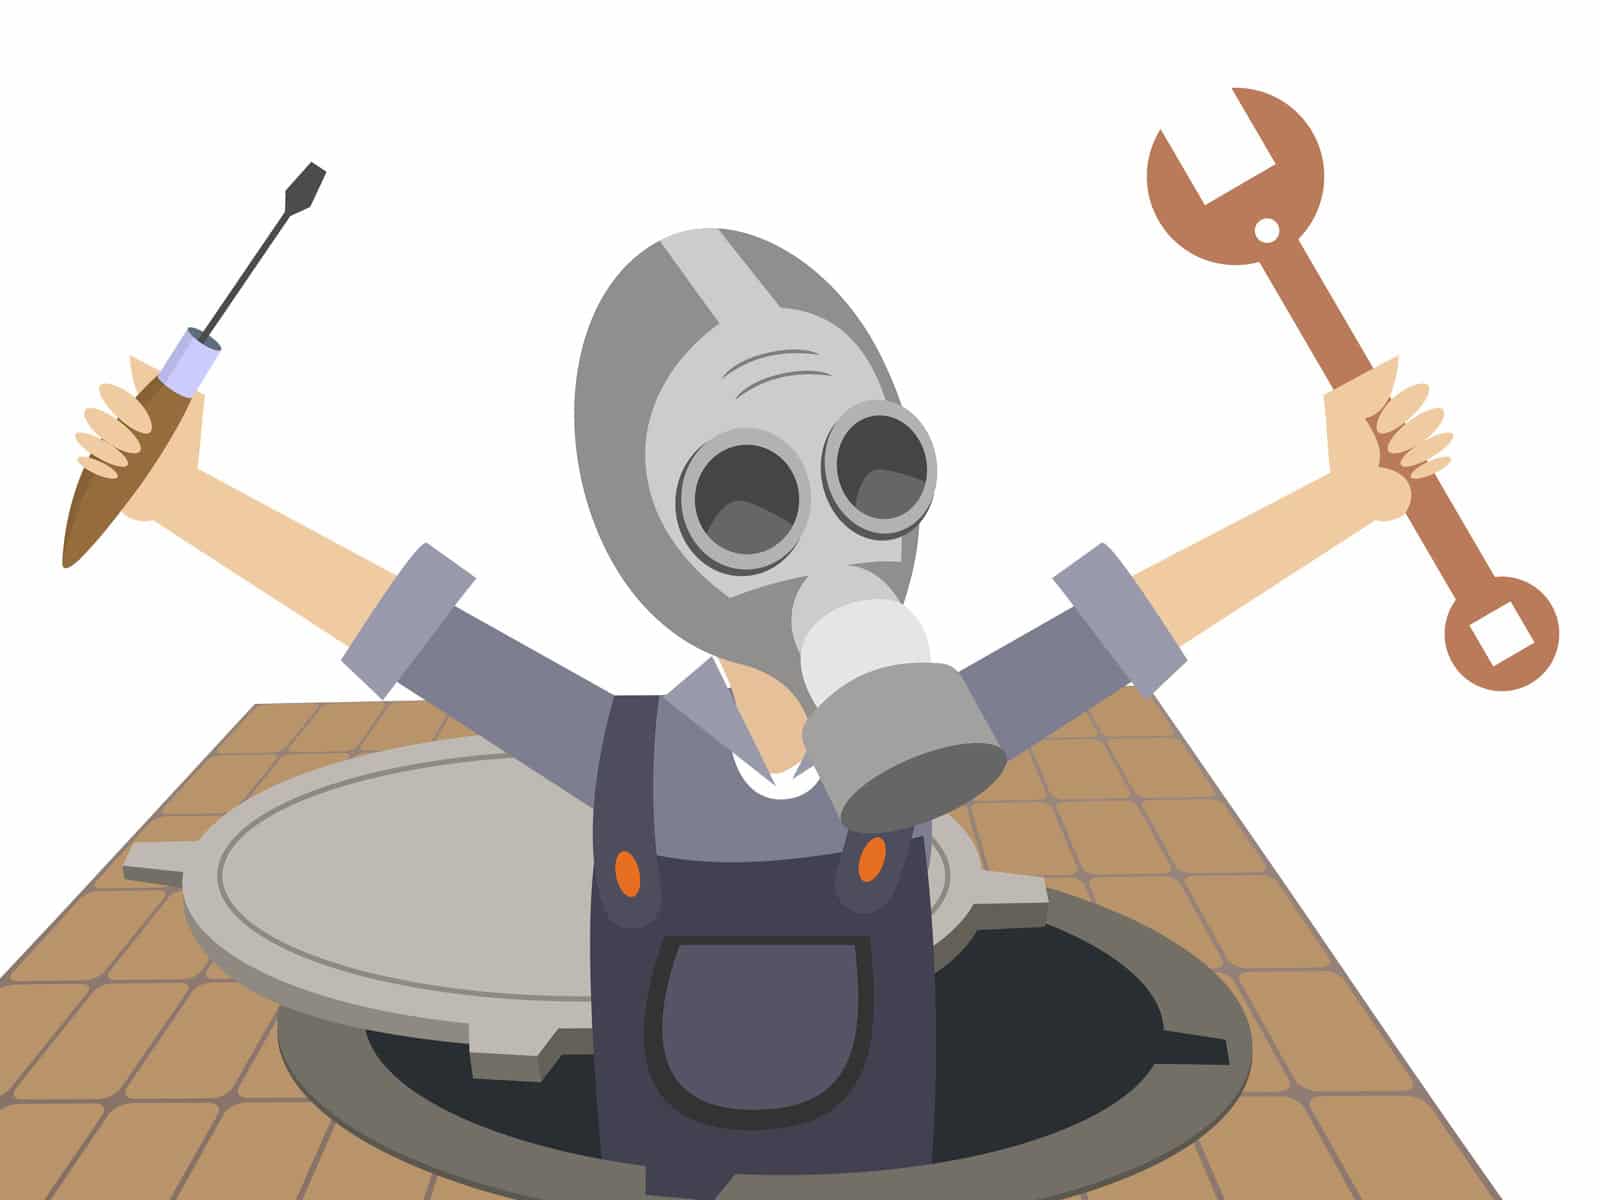 Sewer gas smells expert vector image.